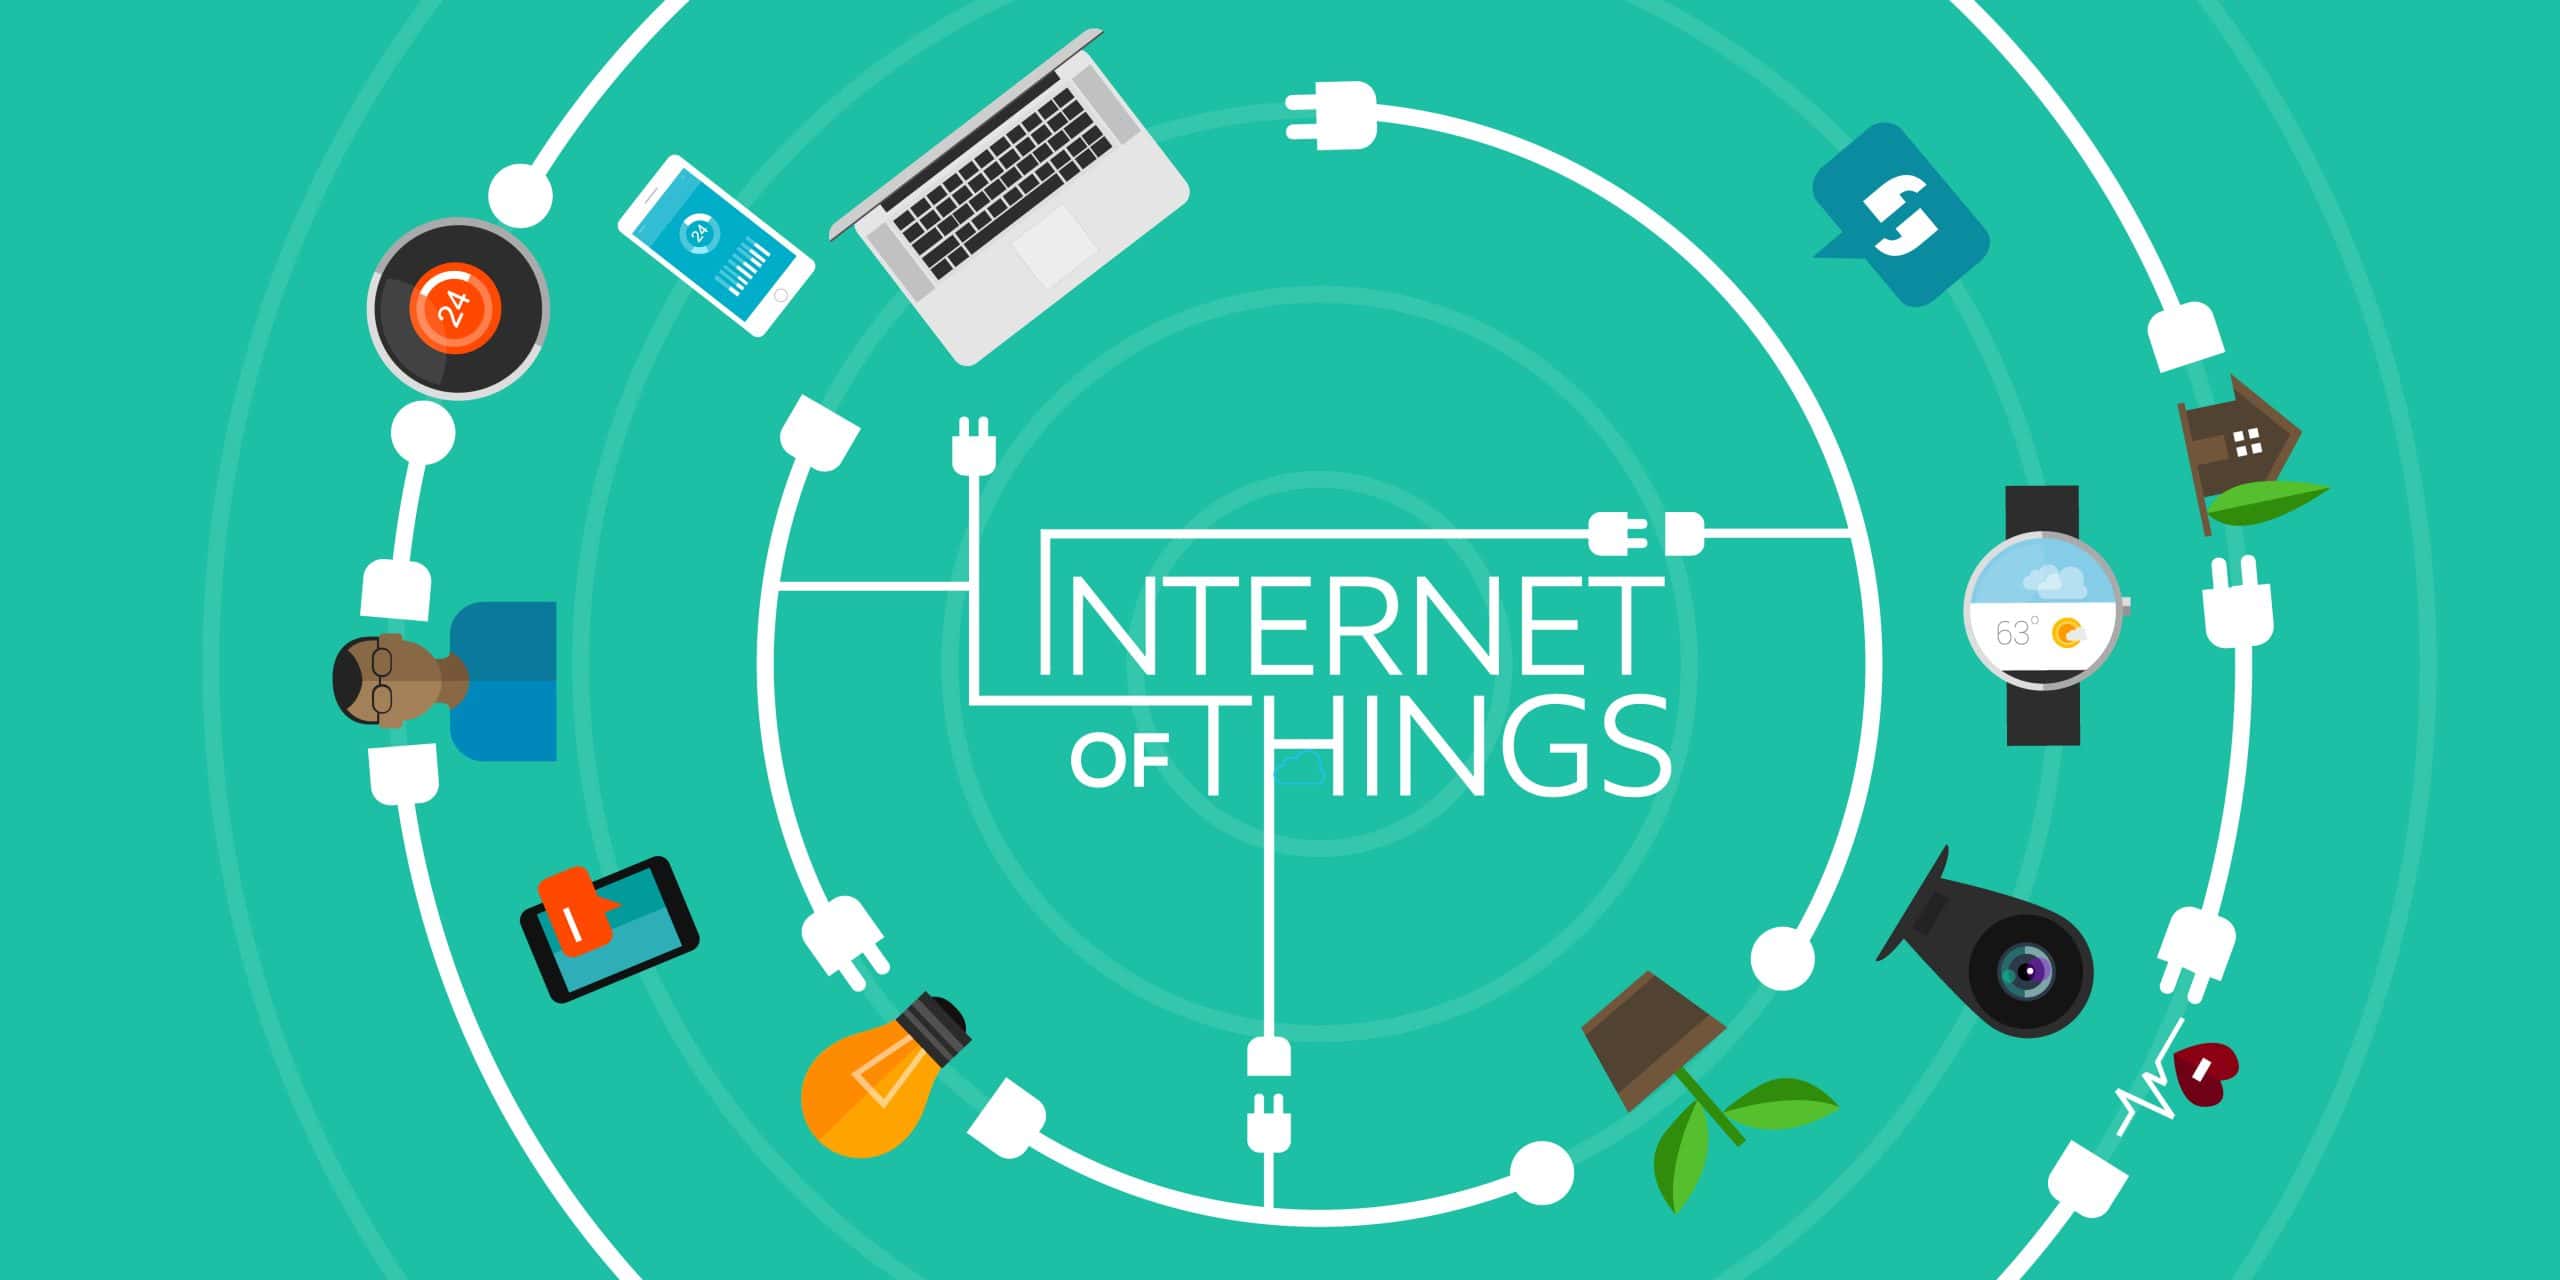 Picture of various smart devices interconnected in two circular shapes with the words Internet of Things in the middle.